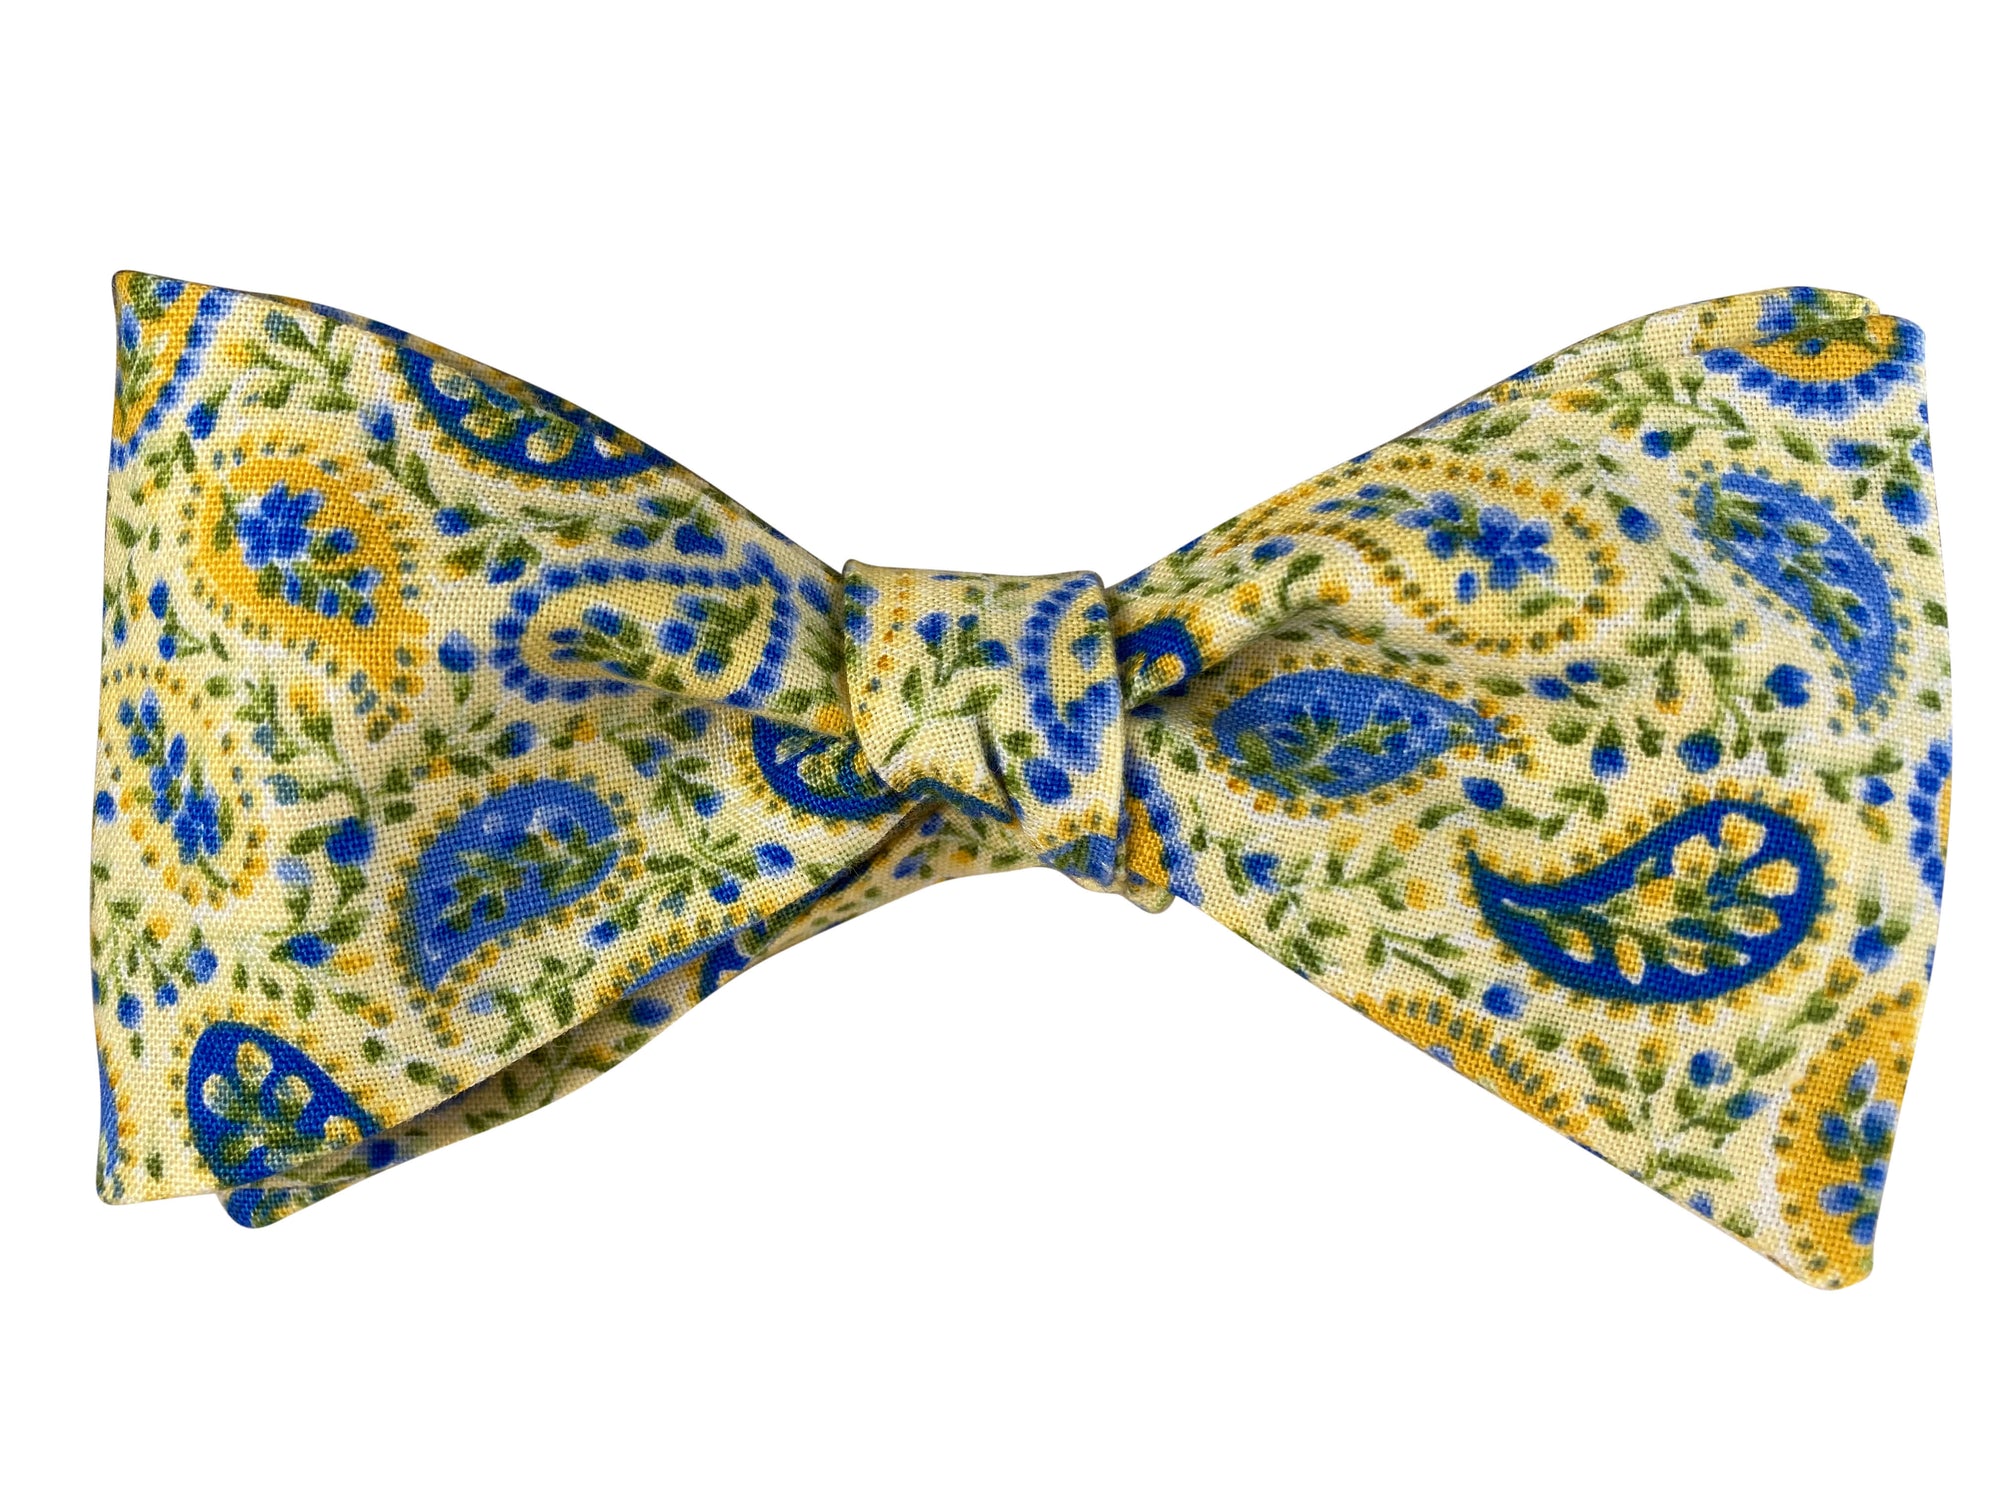 Pale yellow and blue paisley self tie bow tie